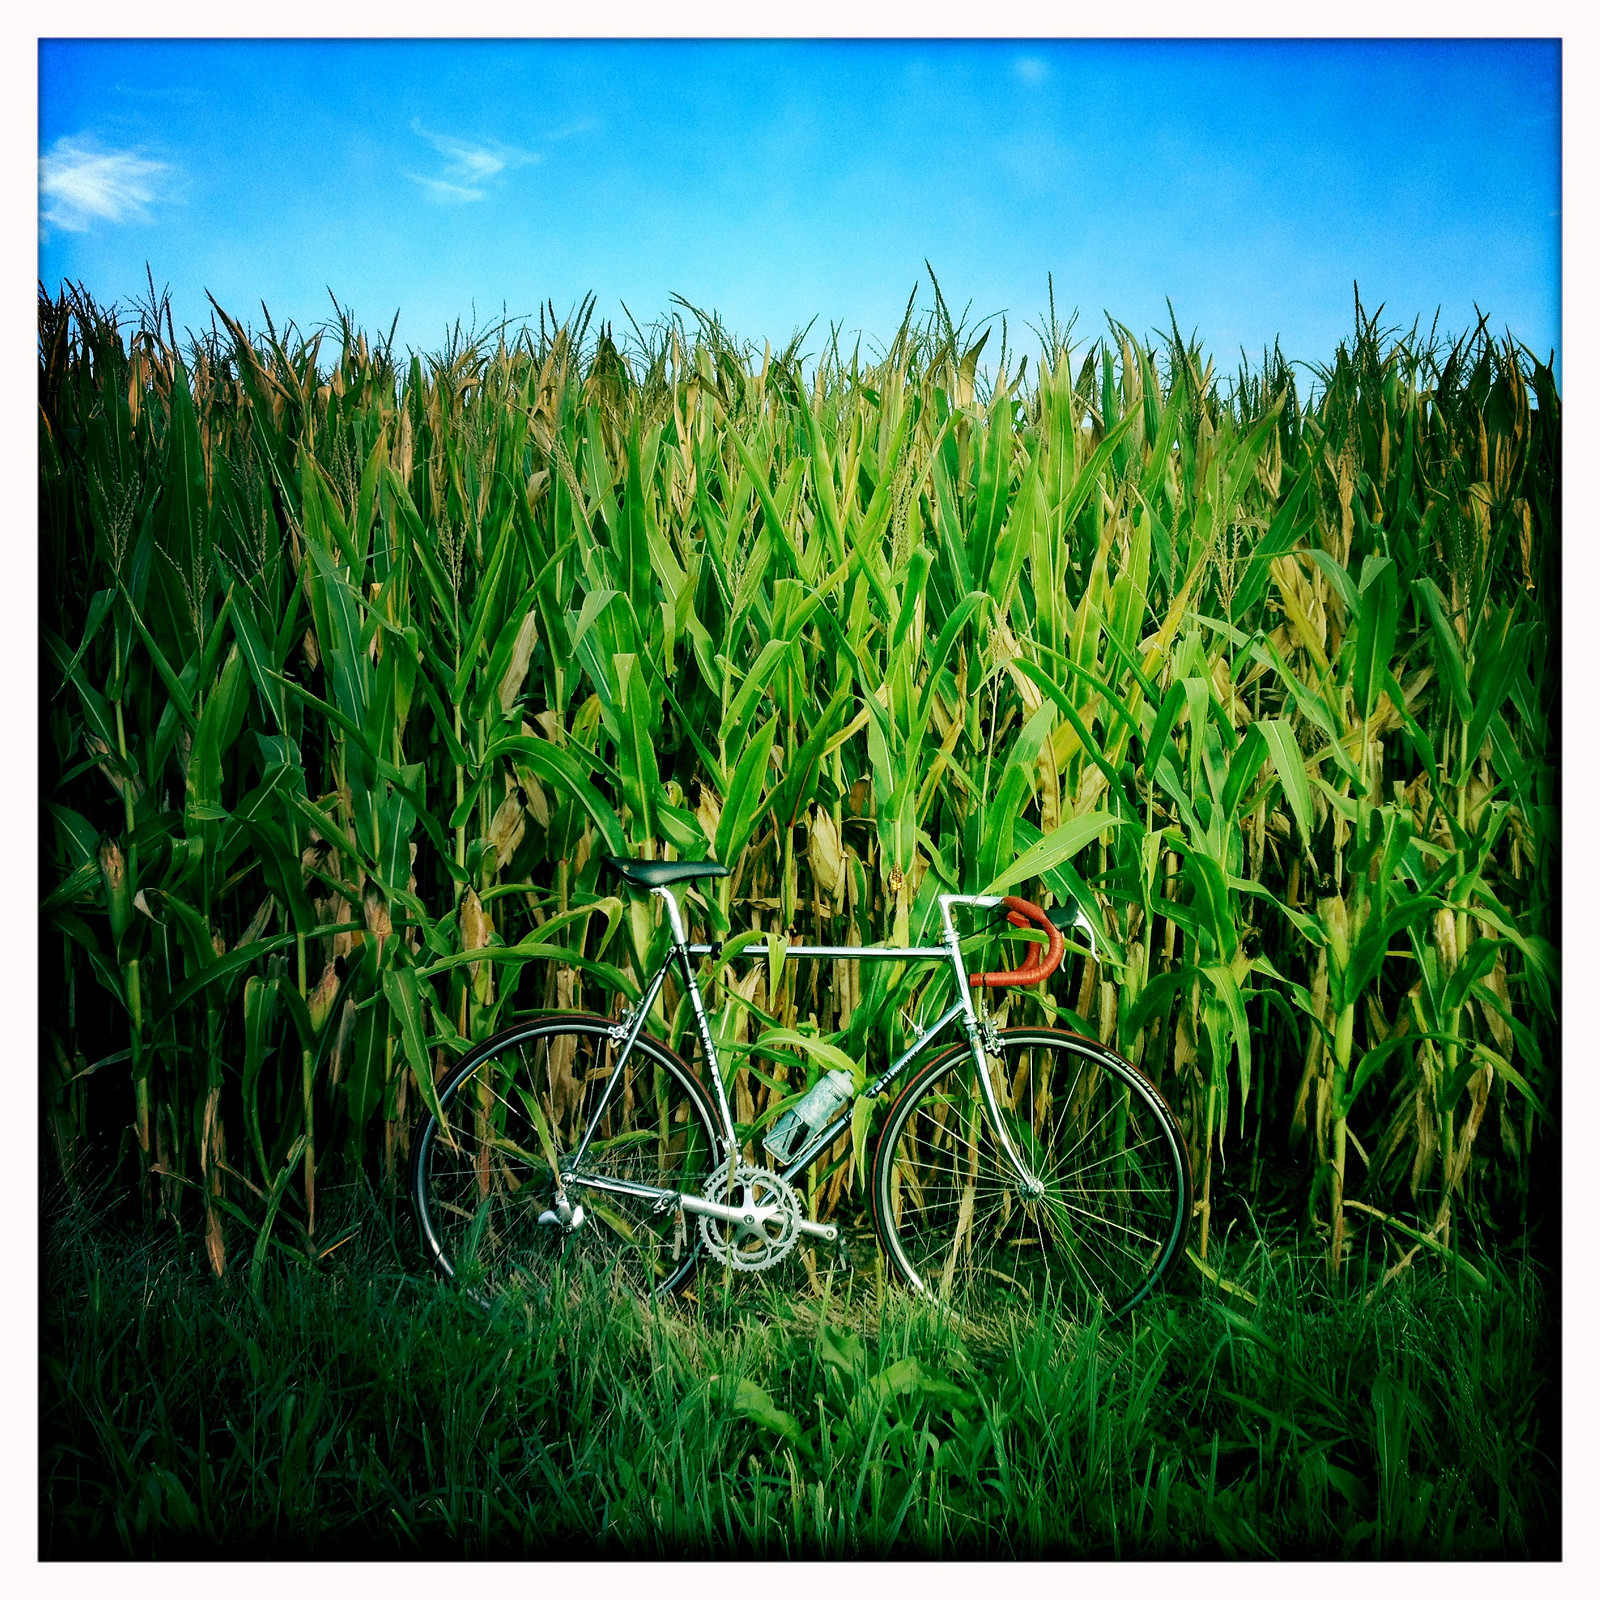 Exploring country roads astride a vintage racing bike.